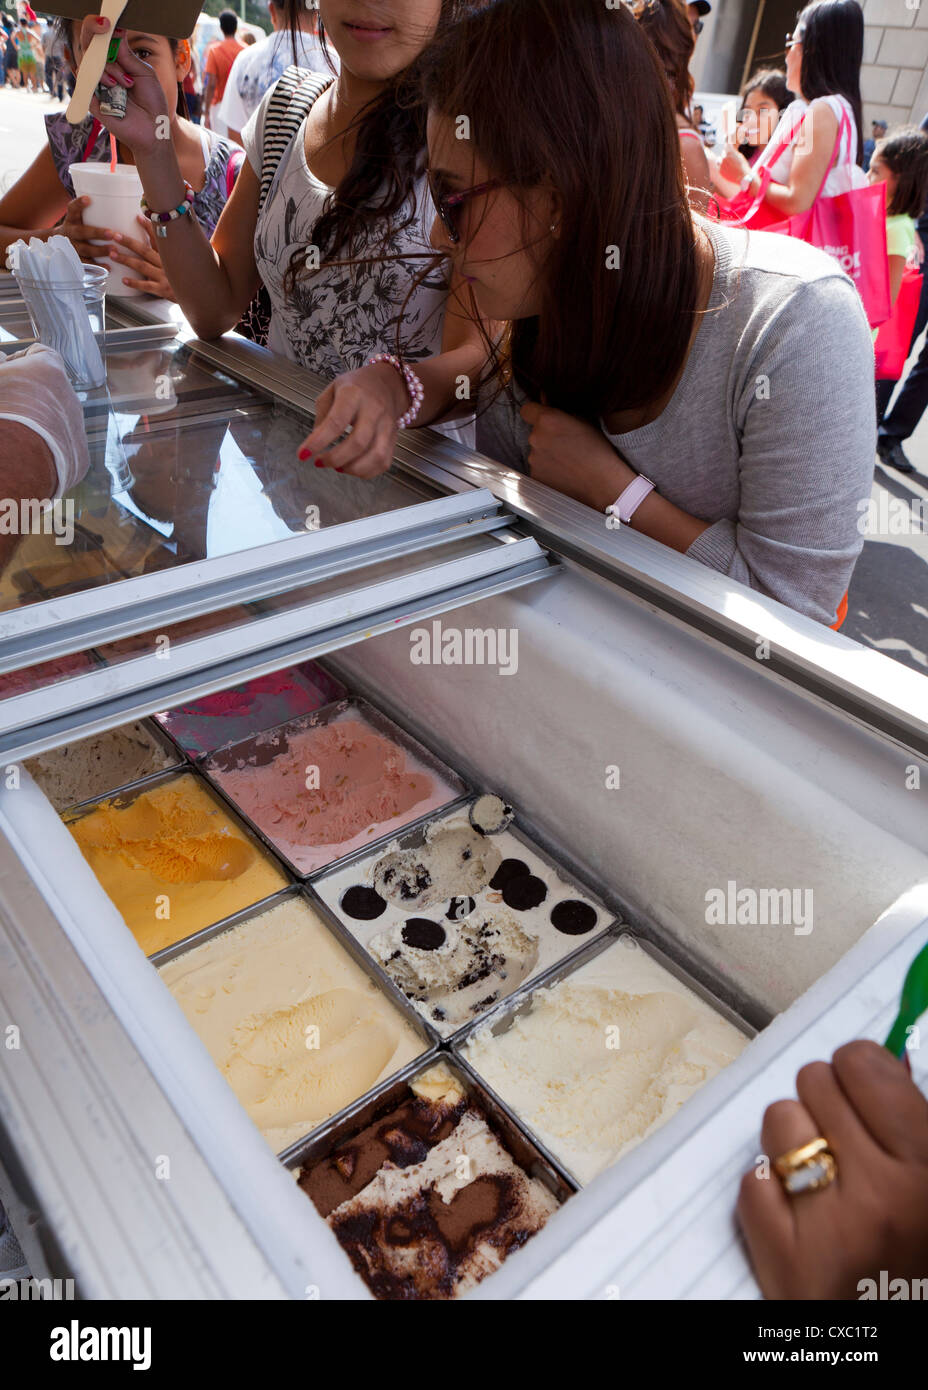 Young women contemplating ice cream flavors at an outdoor festival Stock Photo